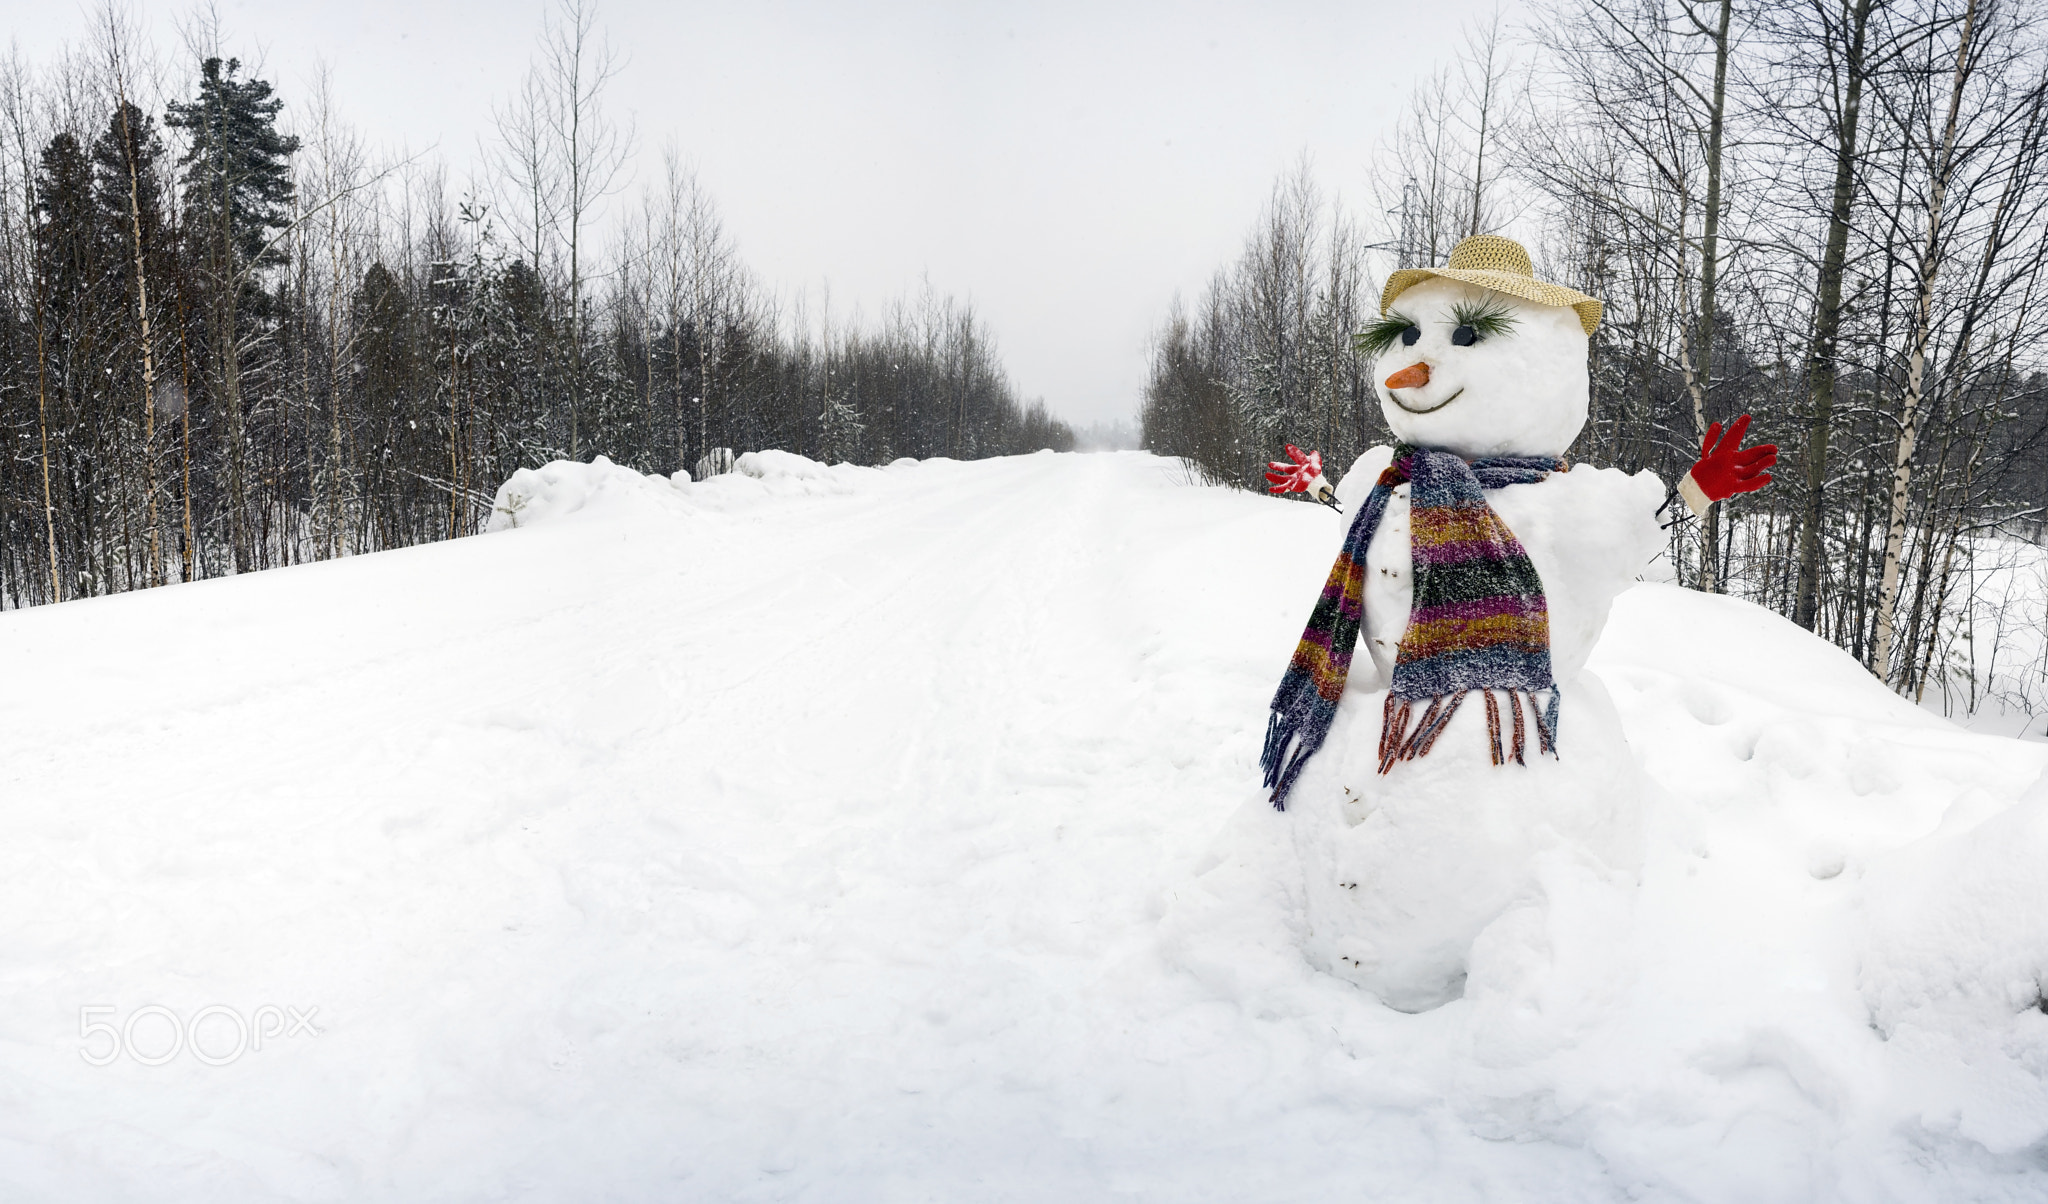 The snowman stands alone on  edge of the road.